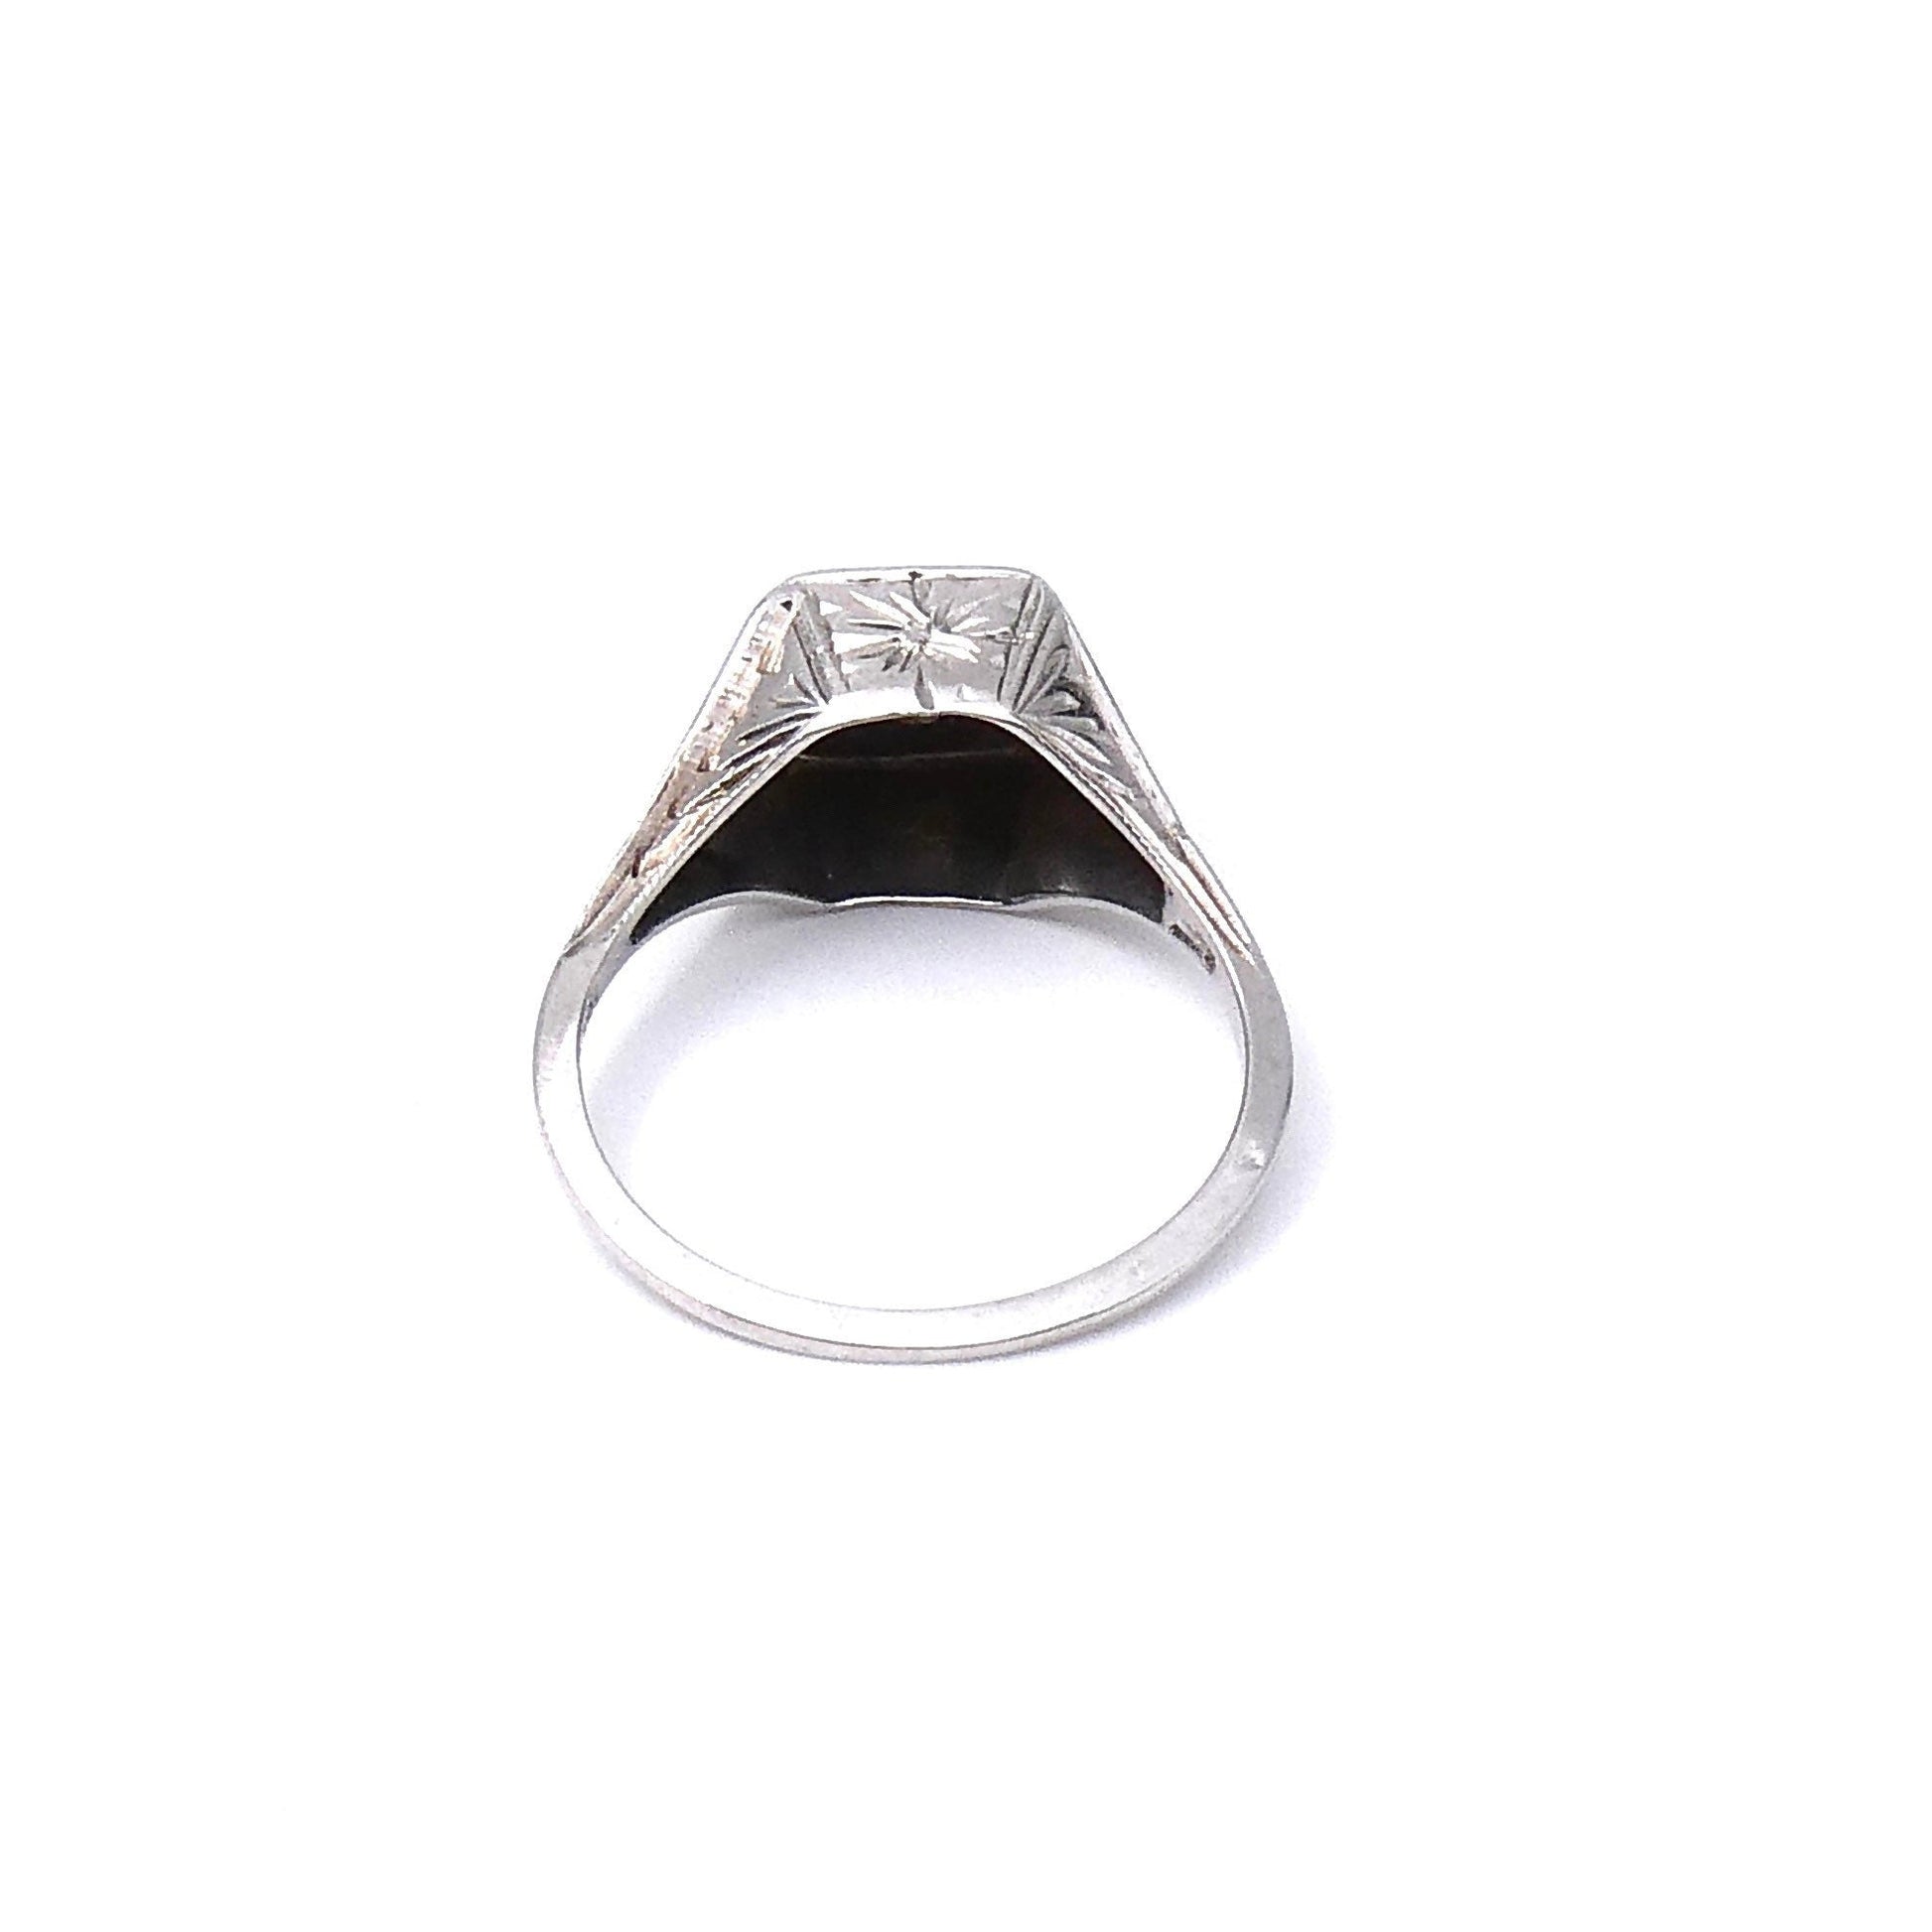 Art Deco diamond ring with a diamond and an ornate engraved setting that sits high on the finger. - Collected